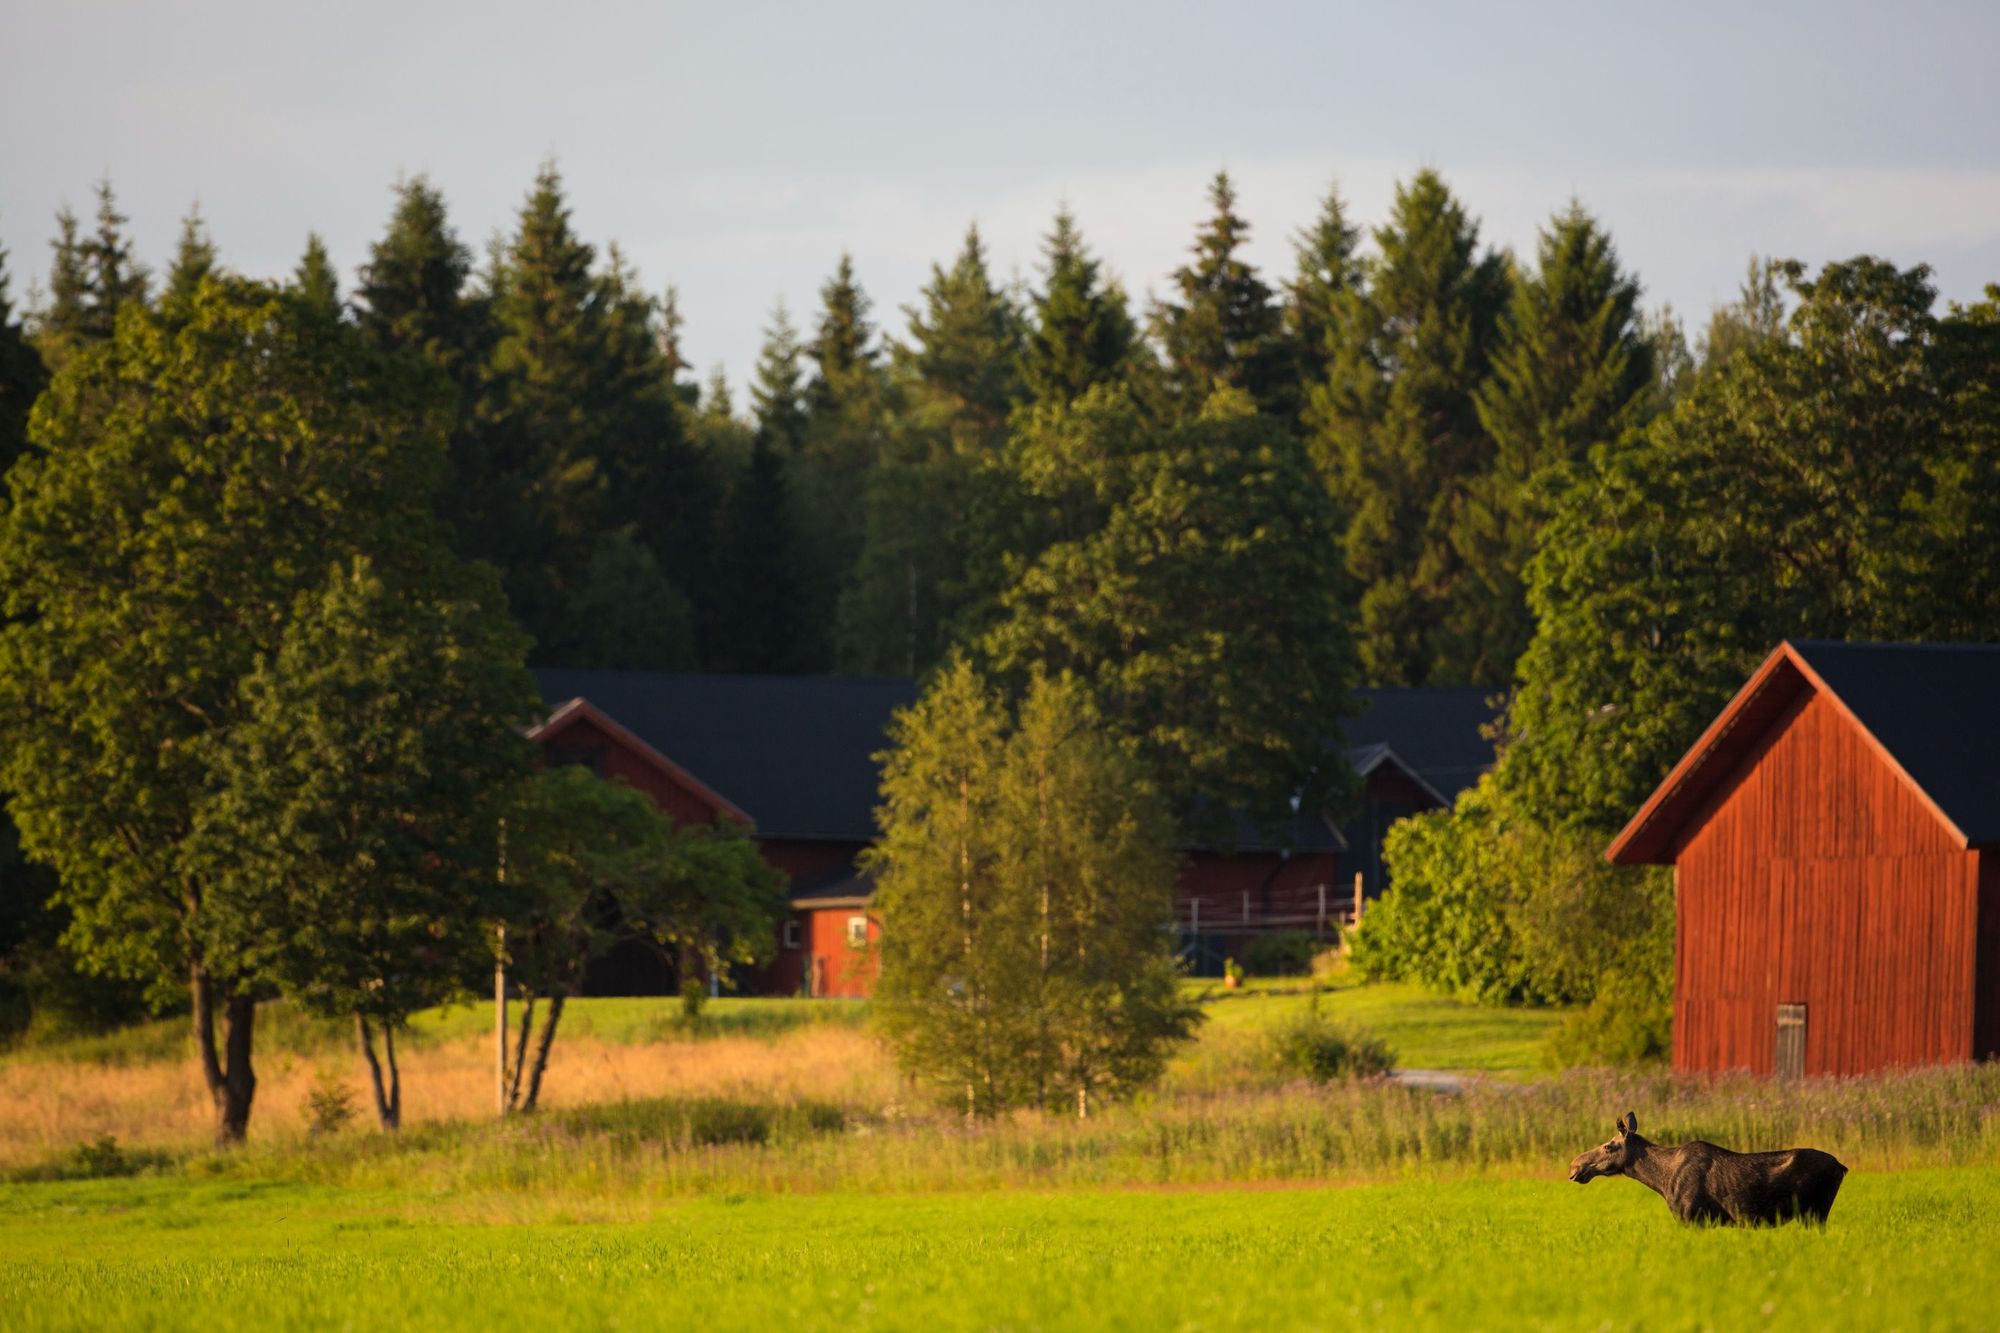 A moose wonders past the log cabins of a central Swedish forest. Photo: Marcus Westber